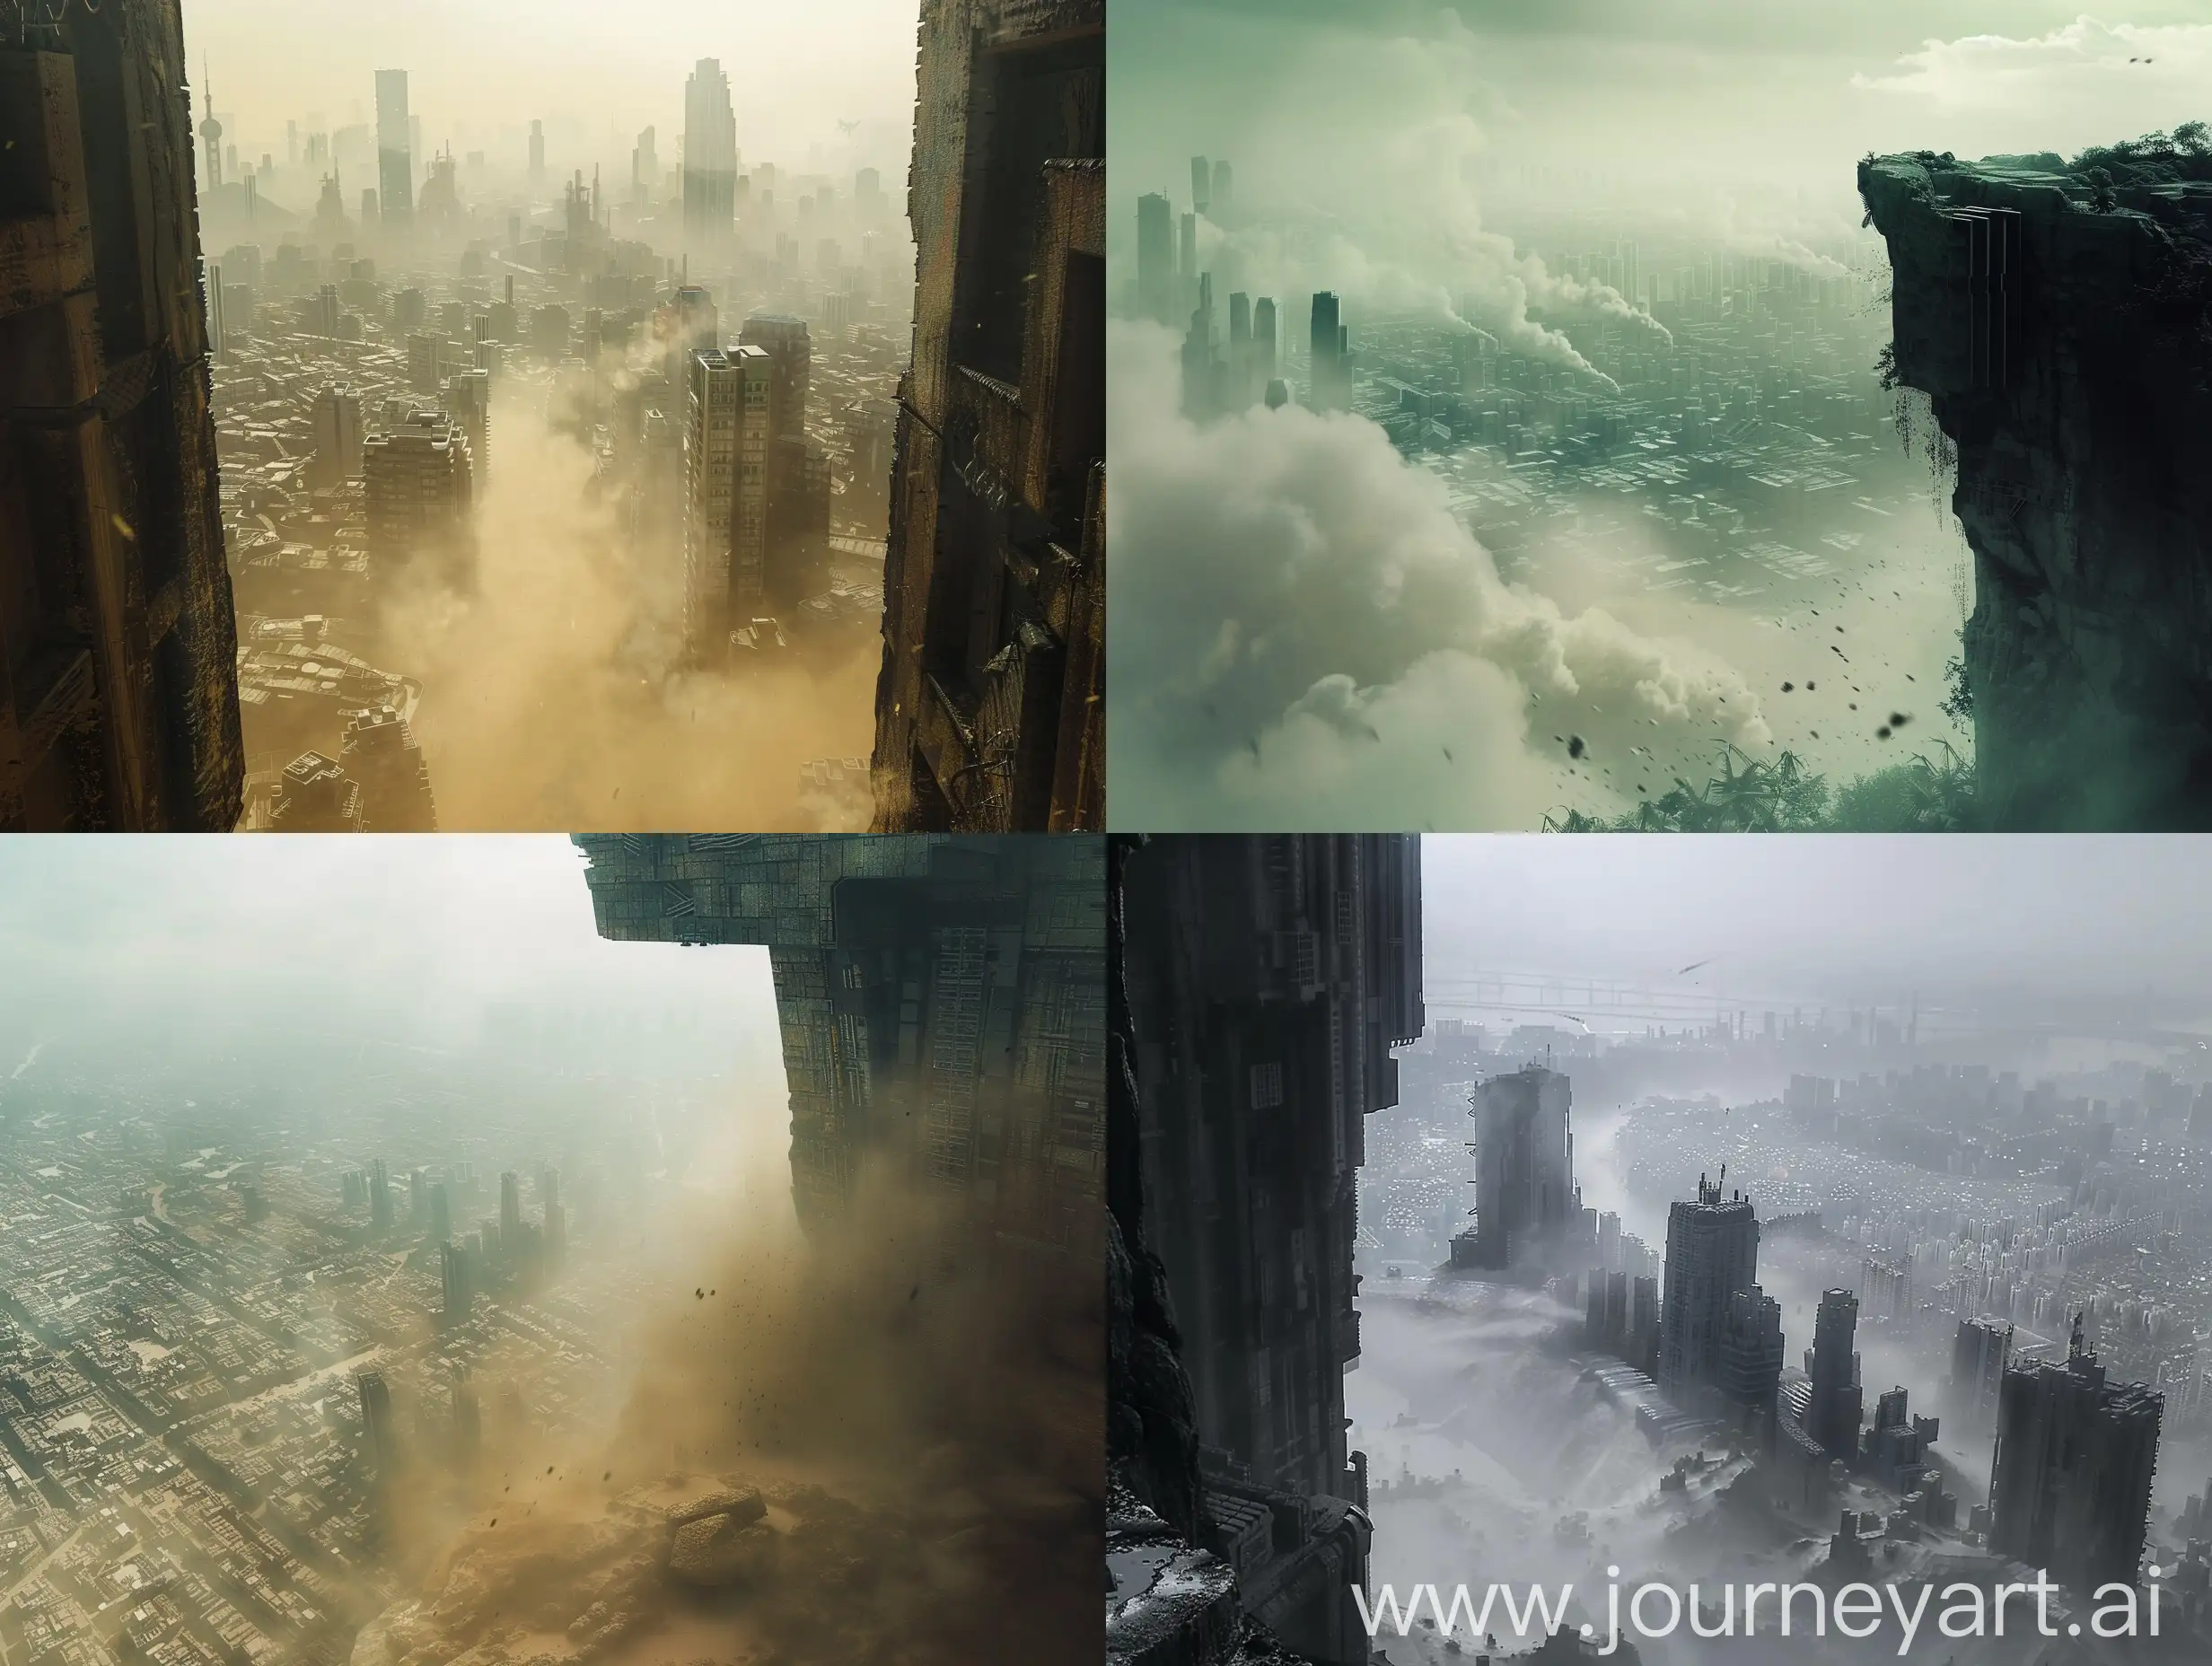 a view of a city from a like a scene from blade runner, city futuristic and clean, dust, city, reminiscent of blade runner, post apocalyptic city, city futuristic in background, city futuristic in background, foggy dystopian world, set in post apocalyptic city, looming over a city, in a tropical and dystopic city, cyberpunk city, 

